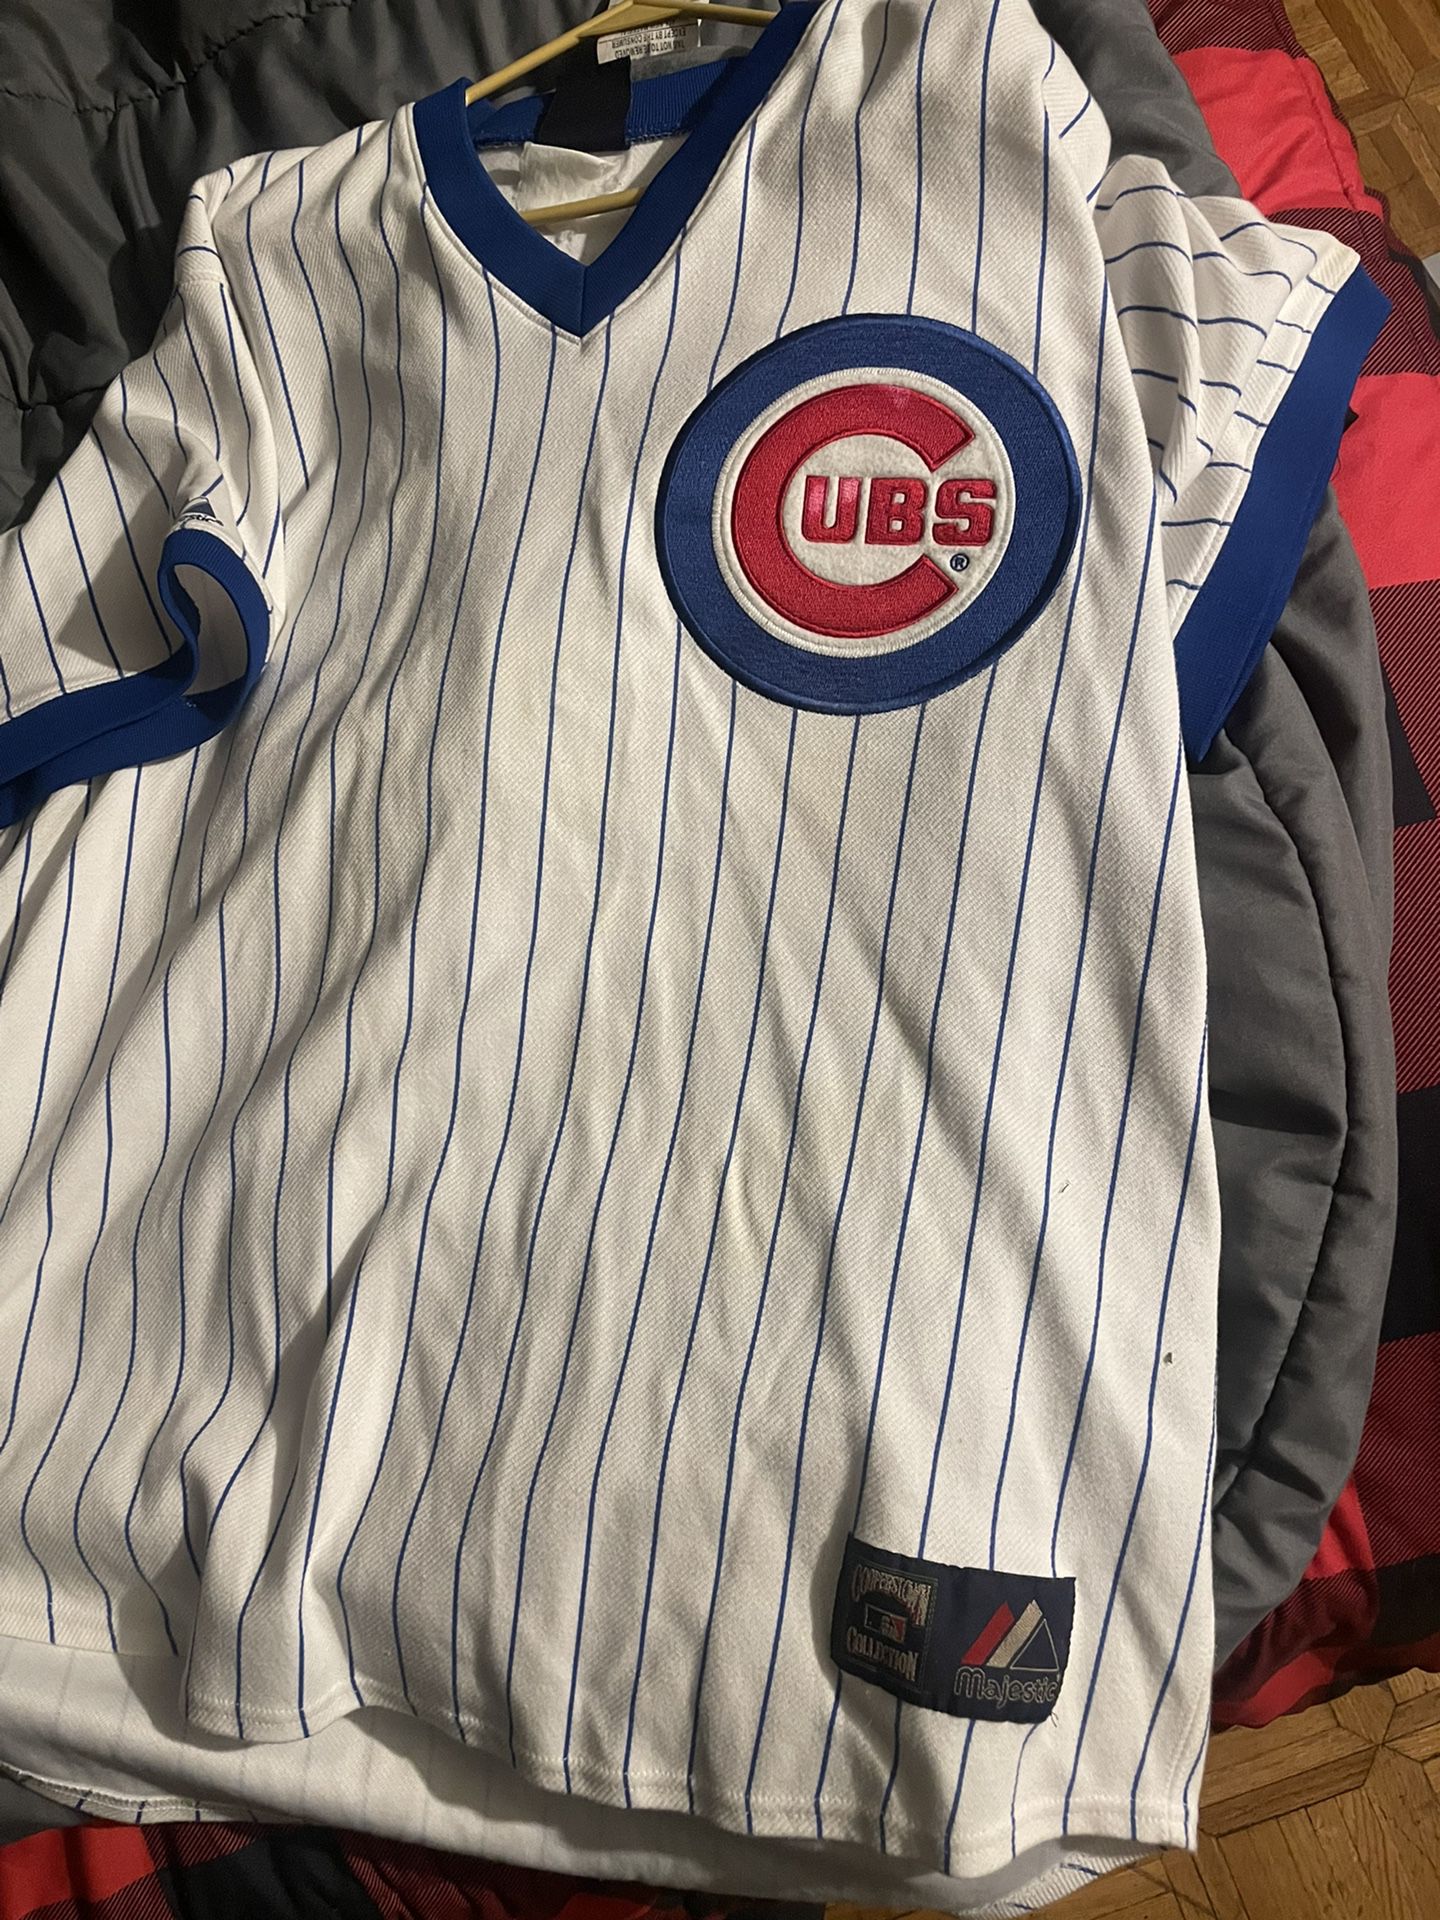 Cubs jersey signed by Alfonso Soriano there's proof in one of the